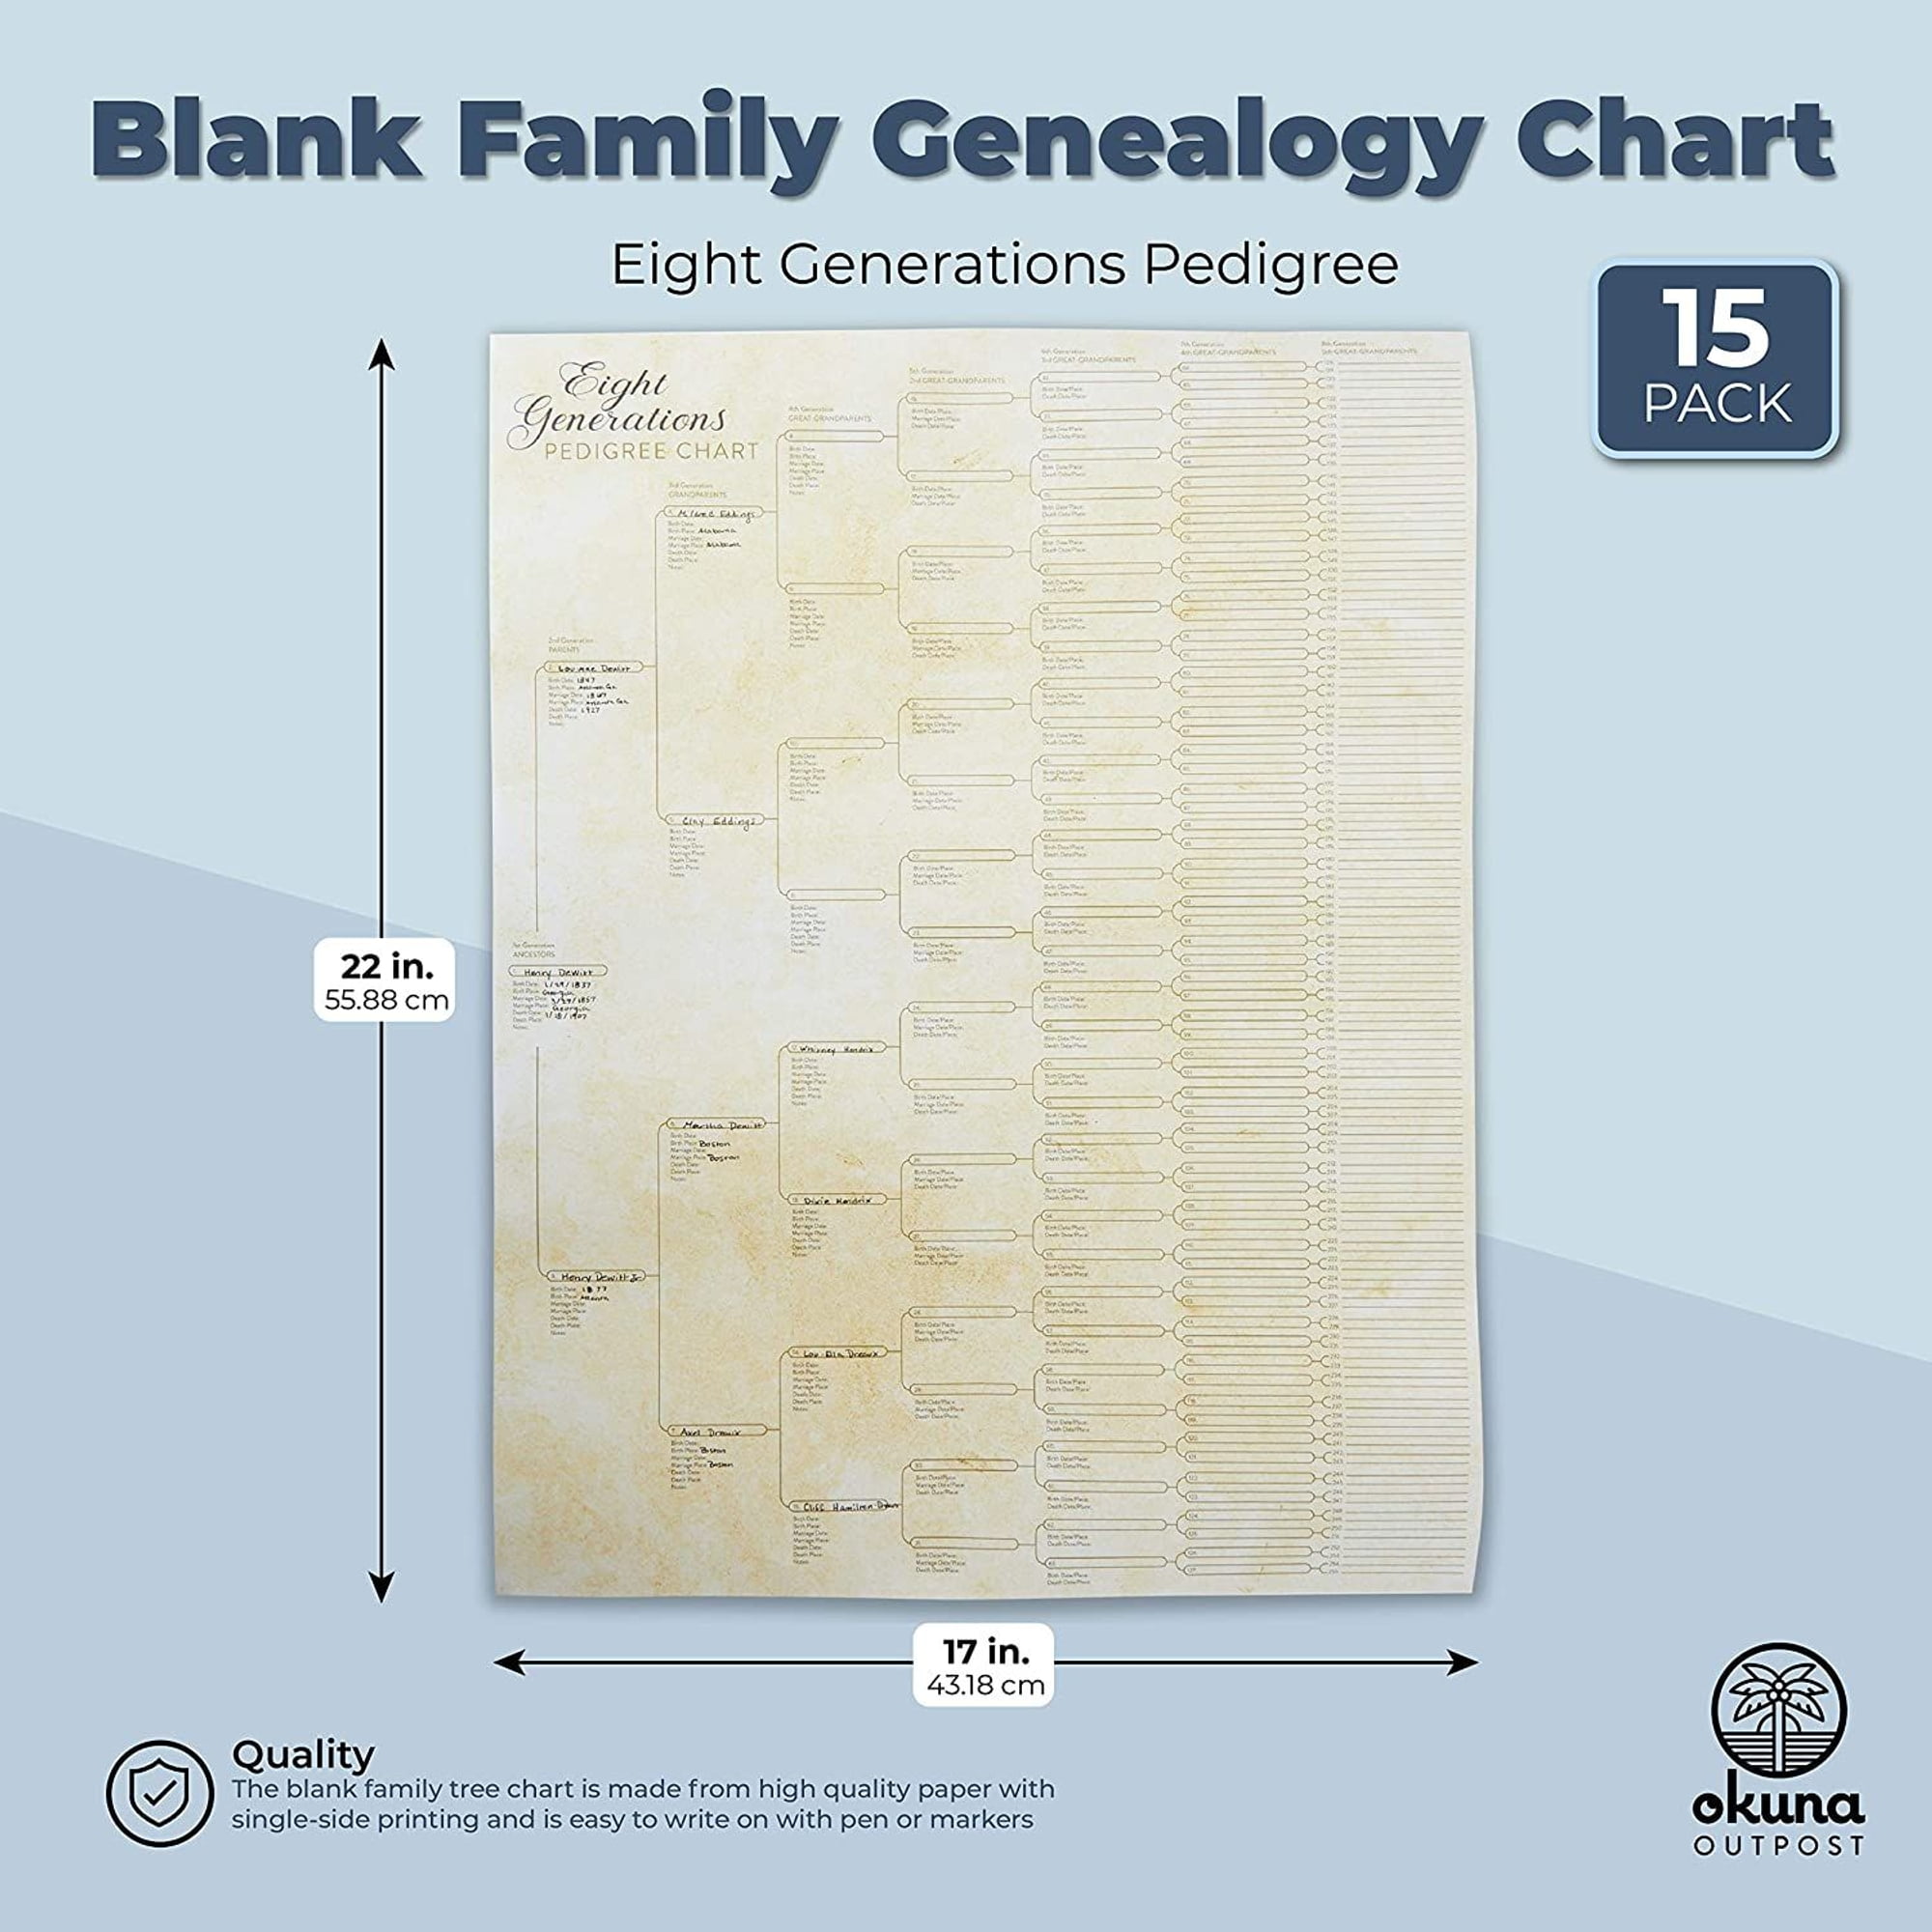 Family Tree Genealogy Logbook: Family Tree Chart Notebook Organizer, Family  tree workbook to record your research, generation pedigree, tree charts  and forms …